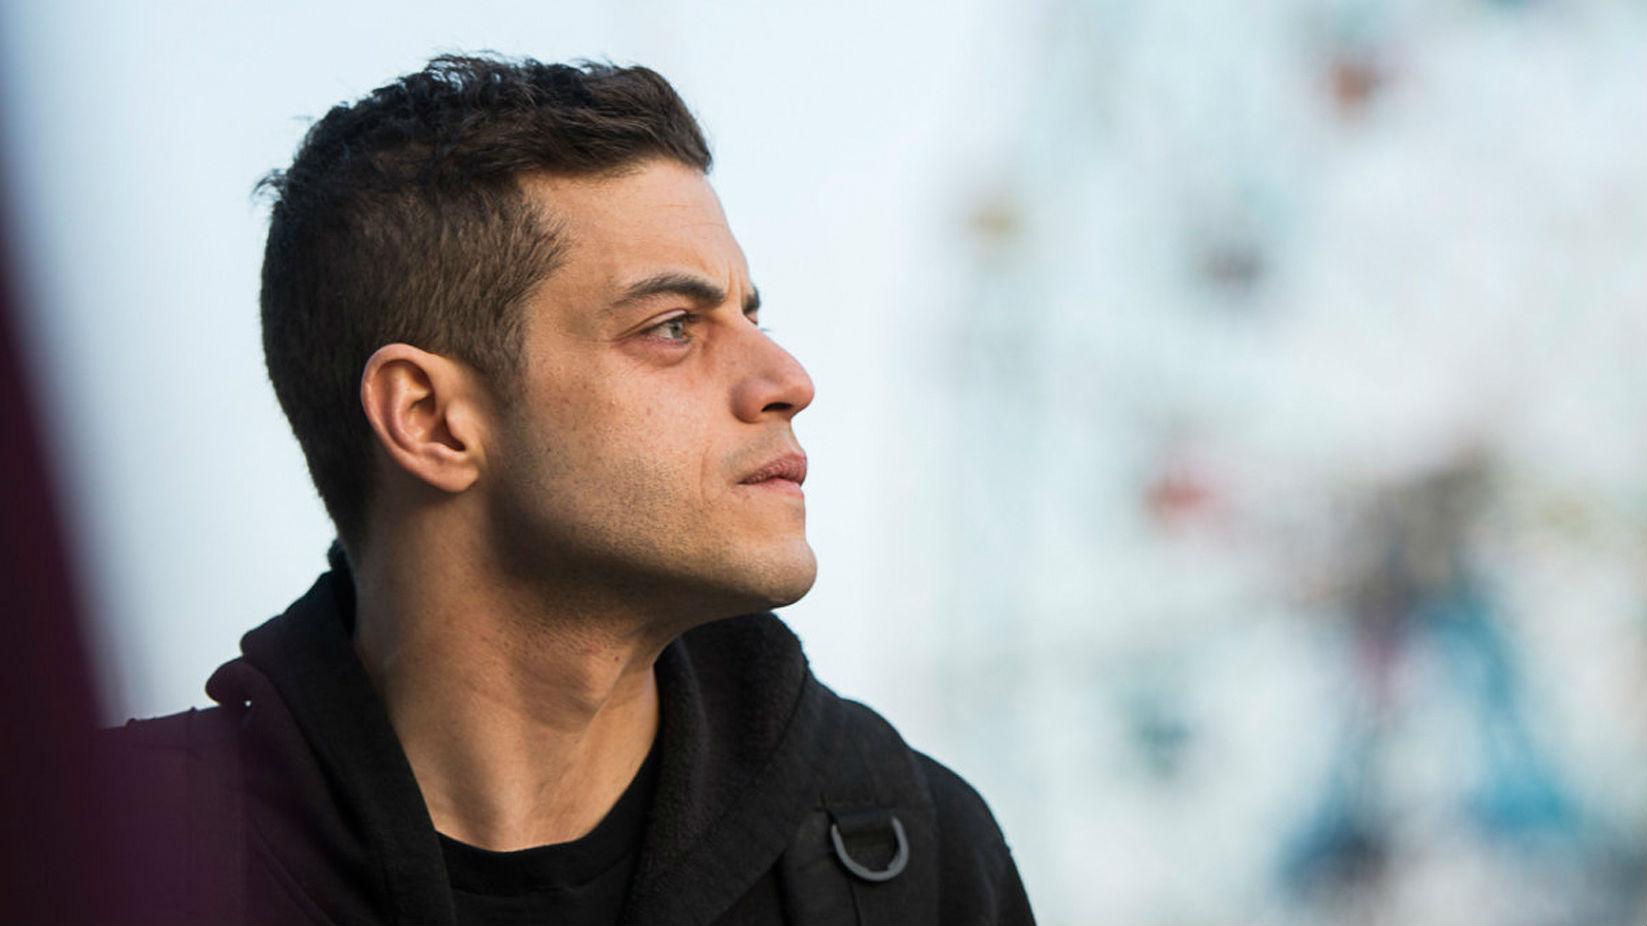 Uber Invited 'Mr. Robot' Star Rami Malek to Teach Its Staff About